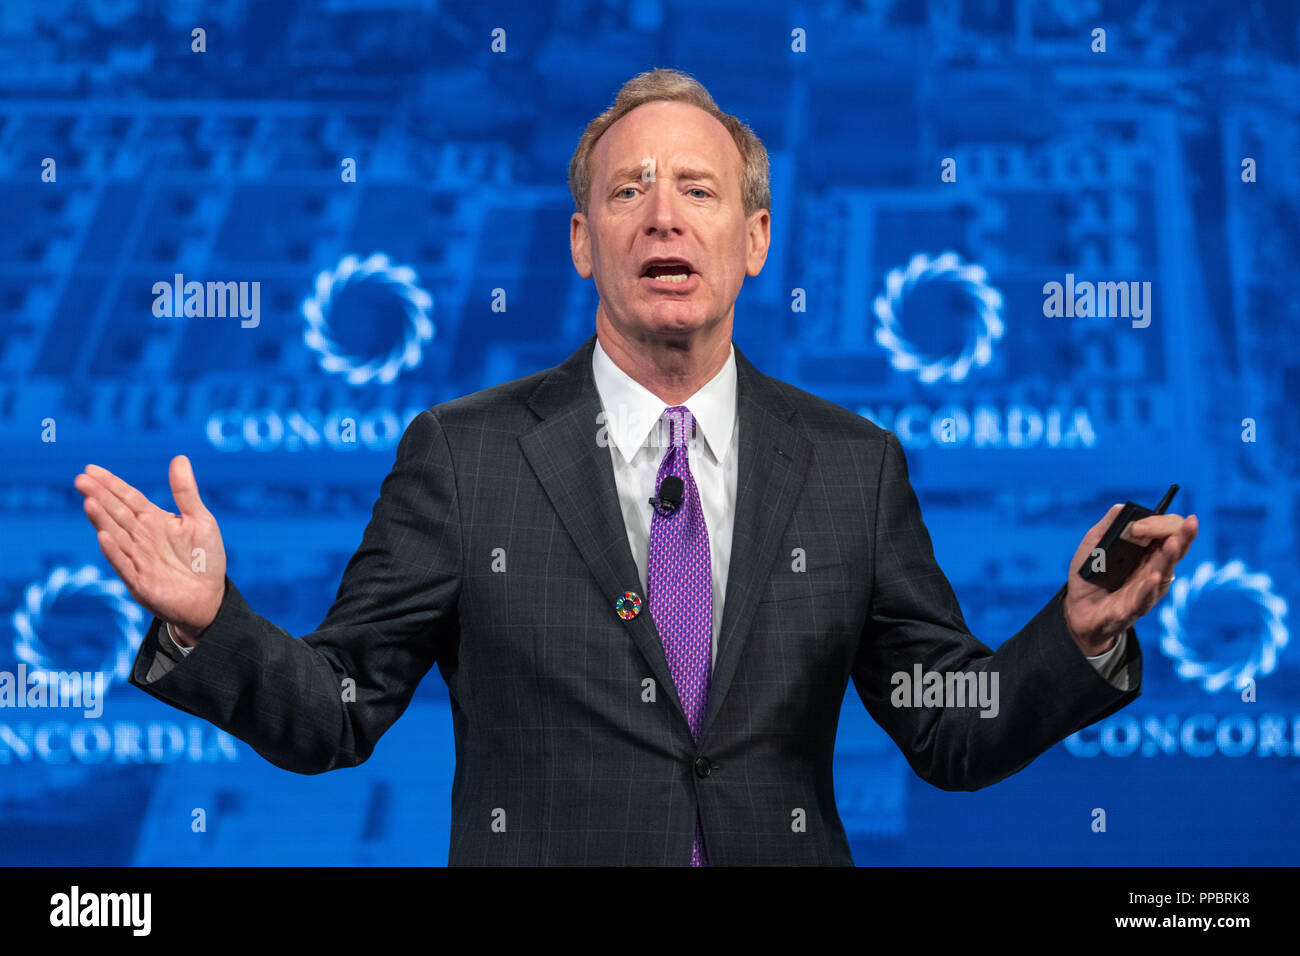 New York, USA, 24 September 2018.  Microsoft President Brad Smith speaks during the Concordia Summit in New York.  Smith announced today that Microsoft has launched a $40 million AI for Humanitarian Action Initiative. Photo by Enrique Shore Credit: Enrique Shore/Alamy Live News Stock Photo